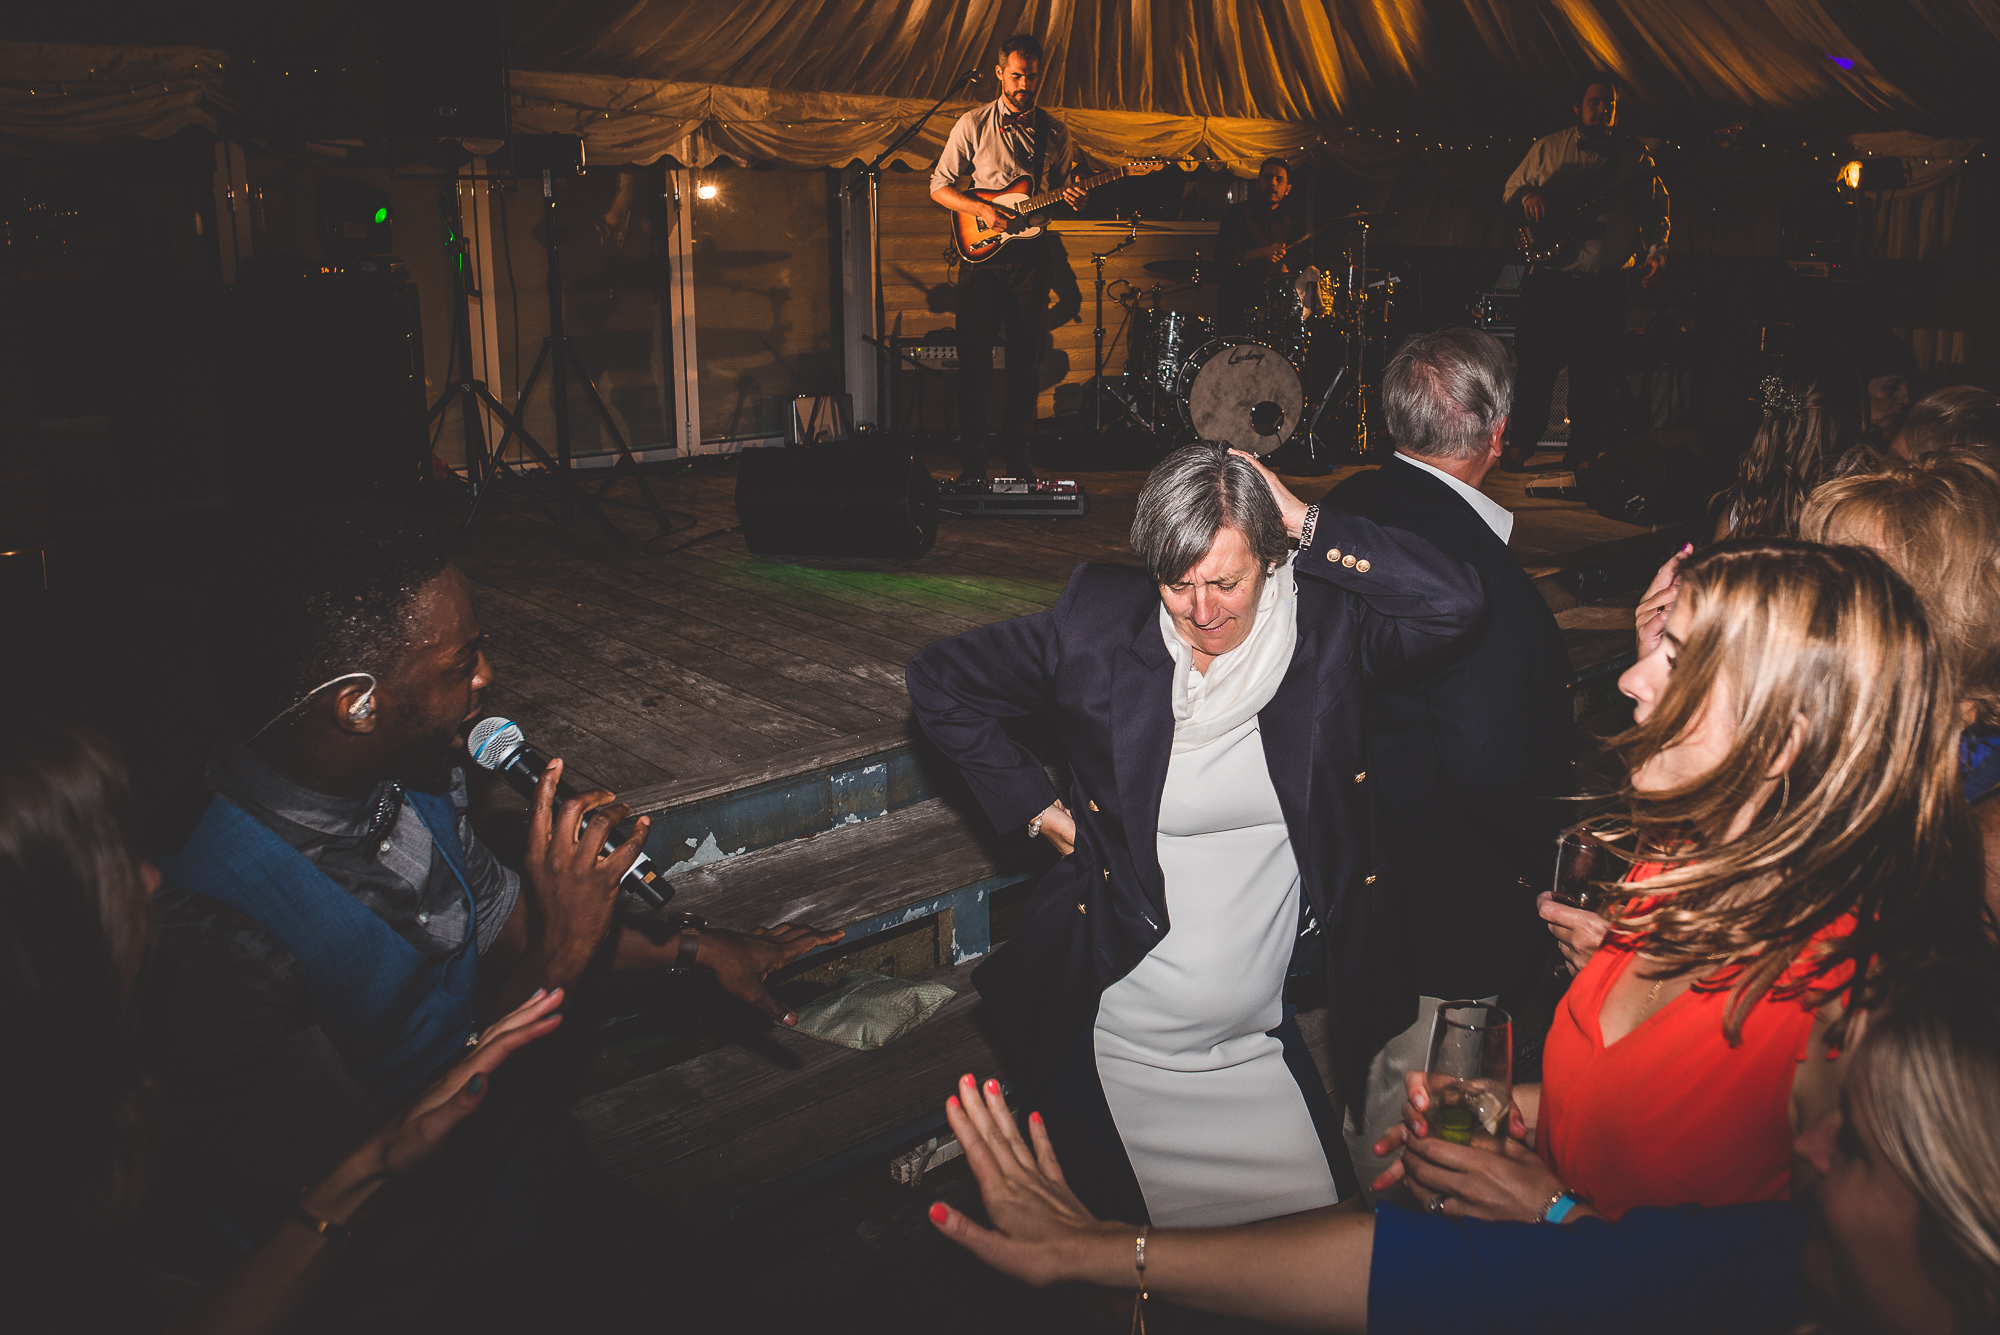 A wedding party dancing in a tent.